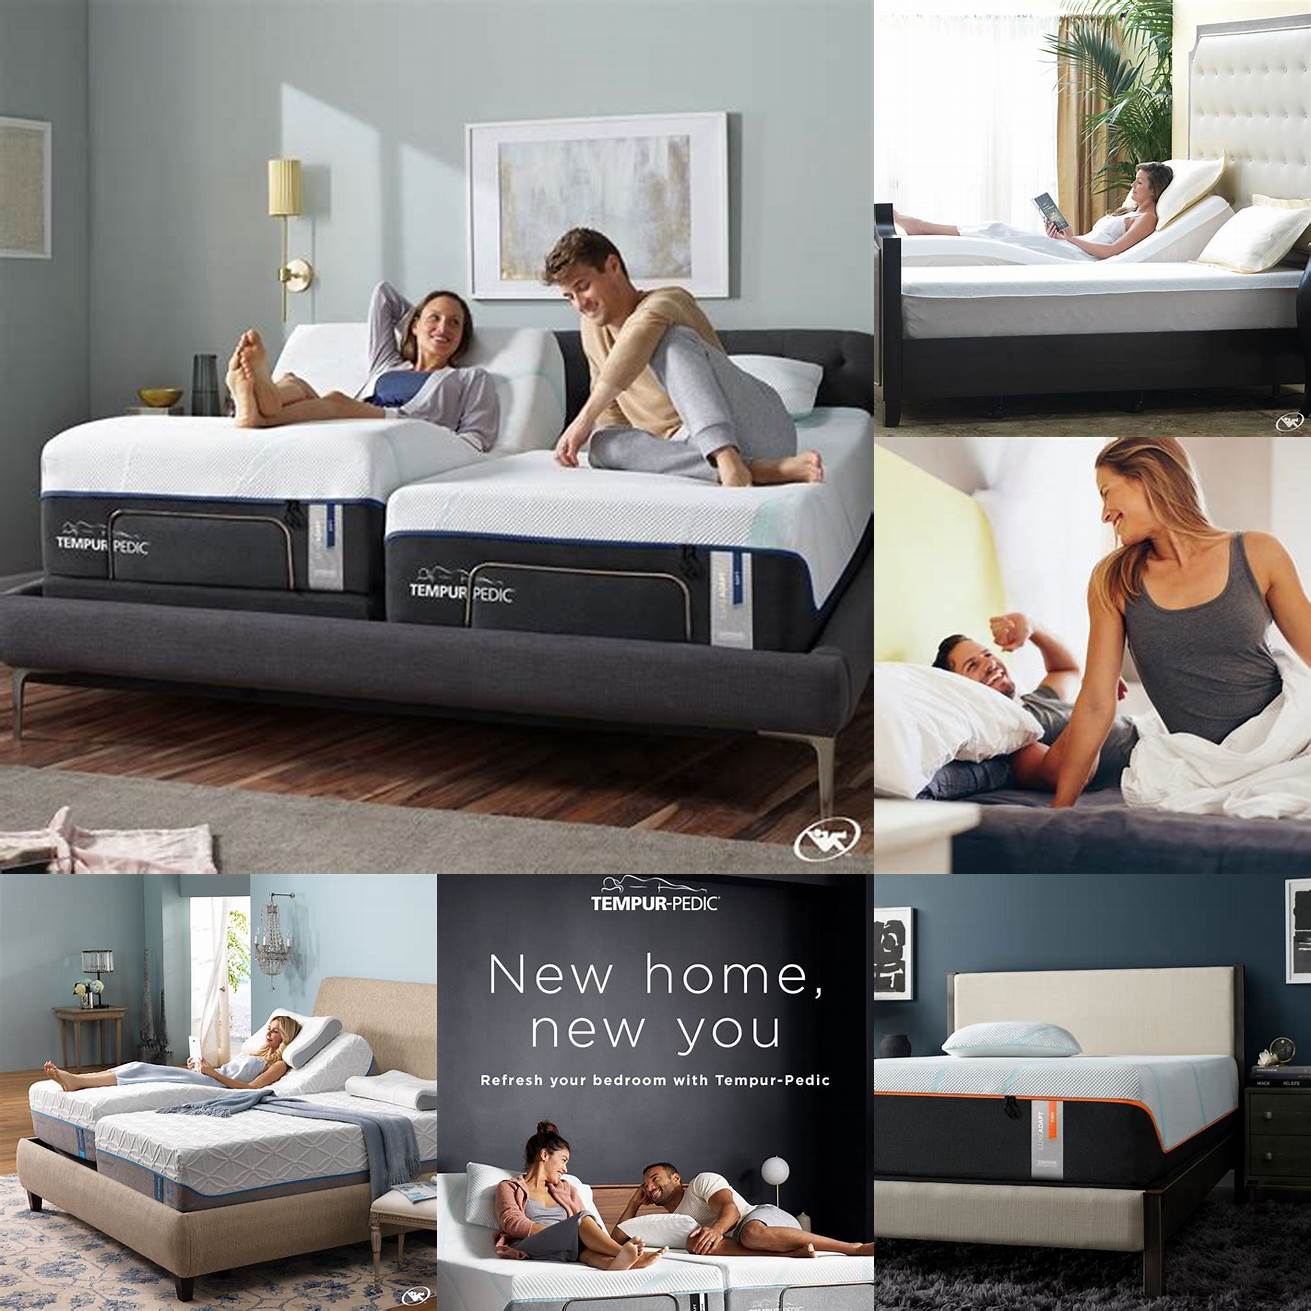 A couple waking up refreshed in a Smart Tempurpedic Bed